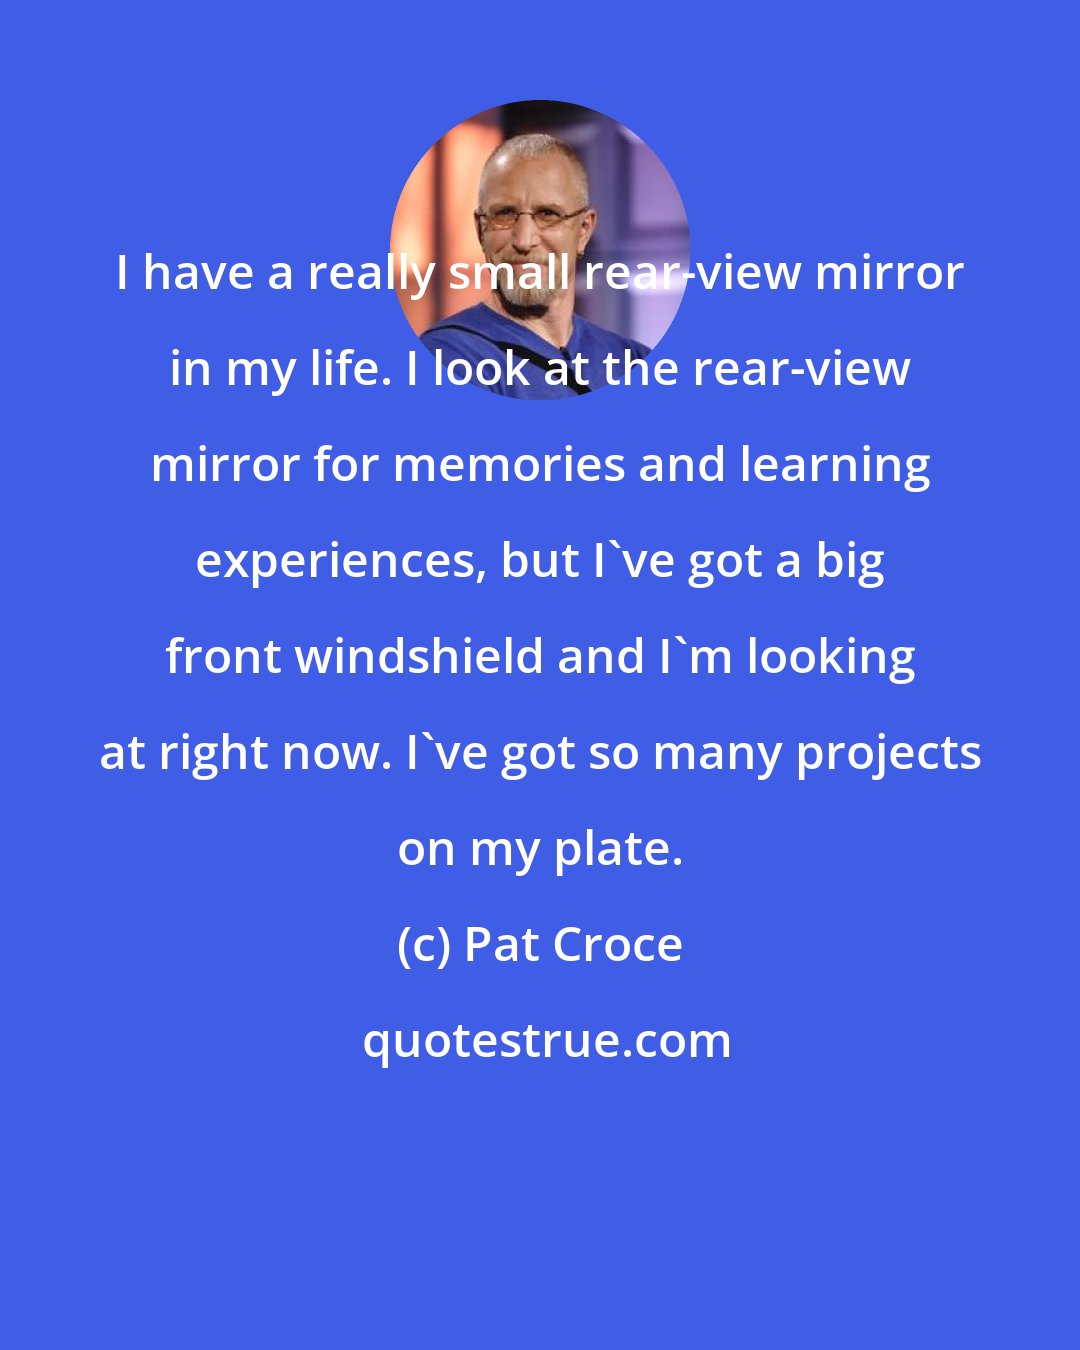 Pat Croce: I have a really small rear-view mirror in my life. I look at the rear-view mirror for memories and learning experiences, but I've got a big front windshield and I'm looking at right now. I've got so many projects on my plate.